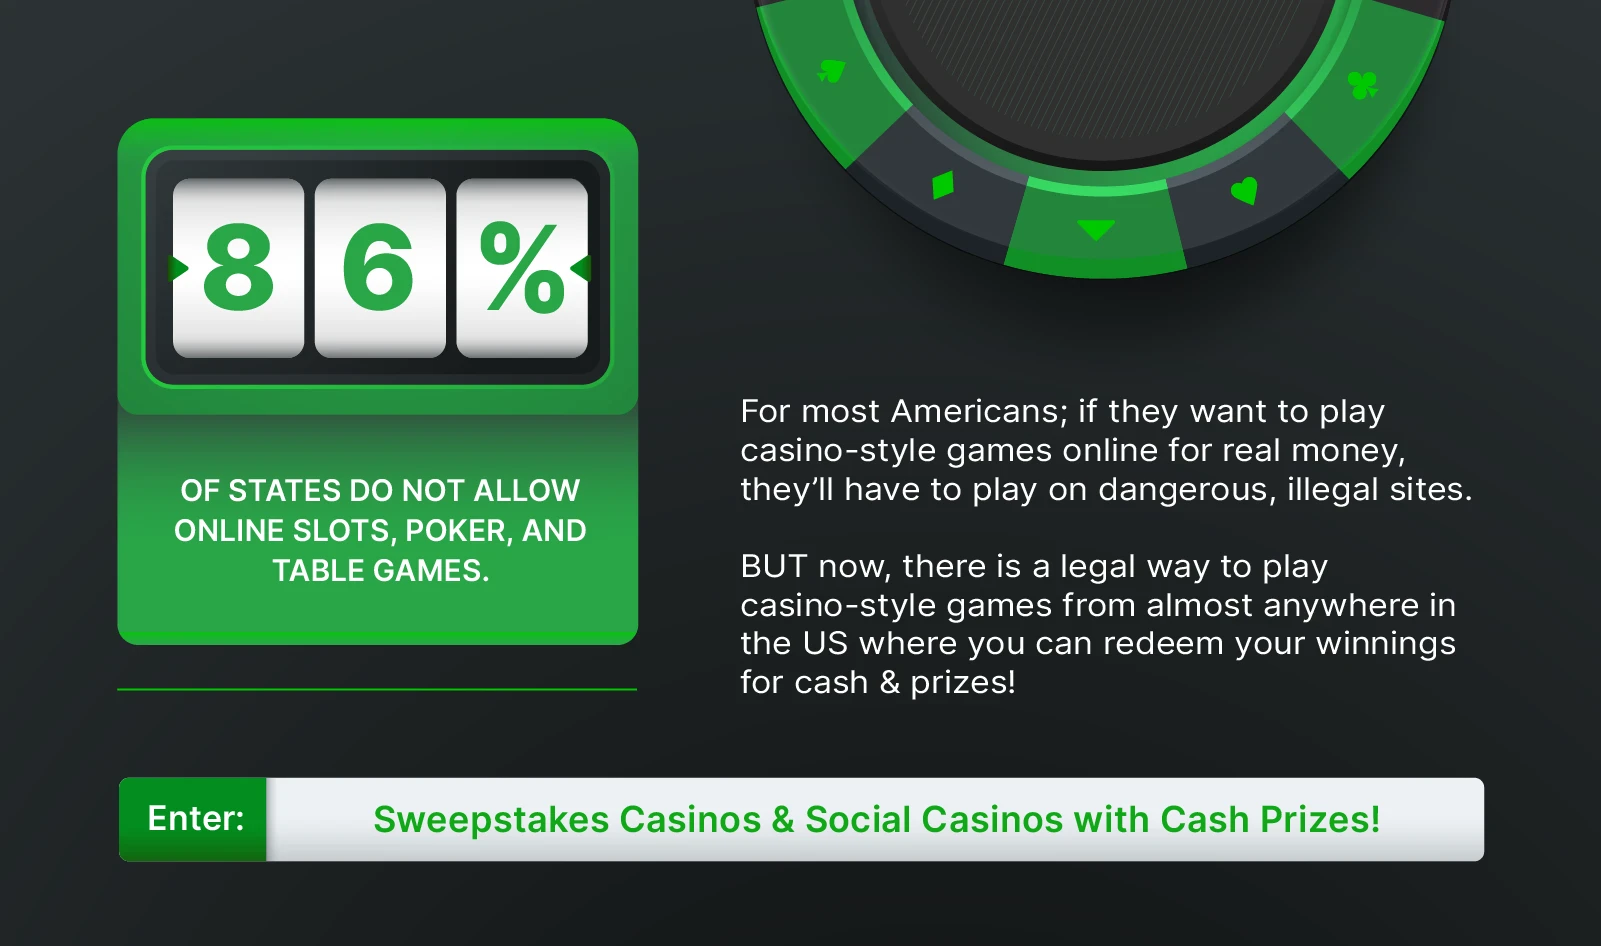 Illustration explaining exactly how Sweepstakes Casino Sites came to be